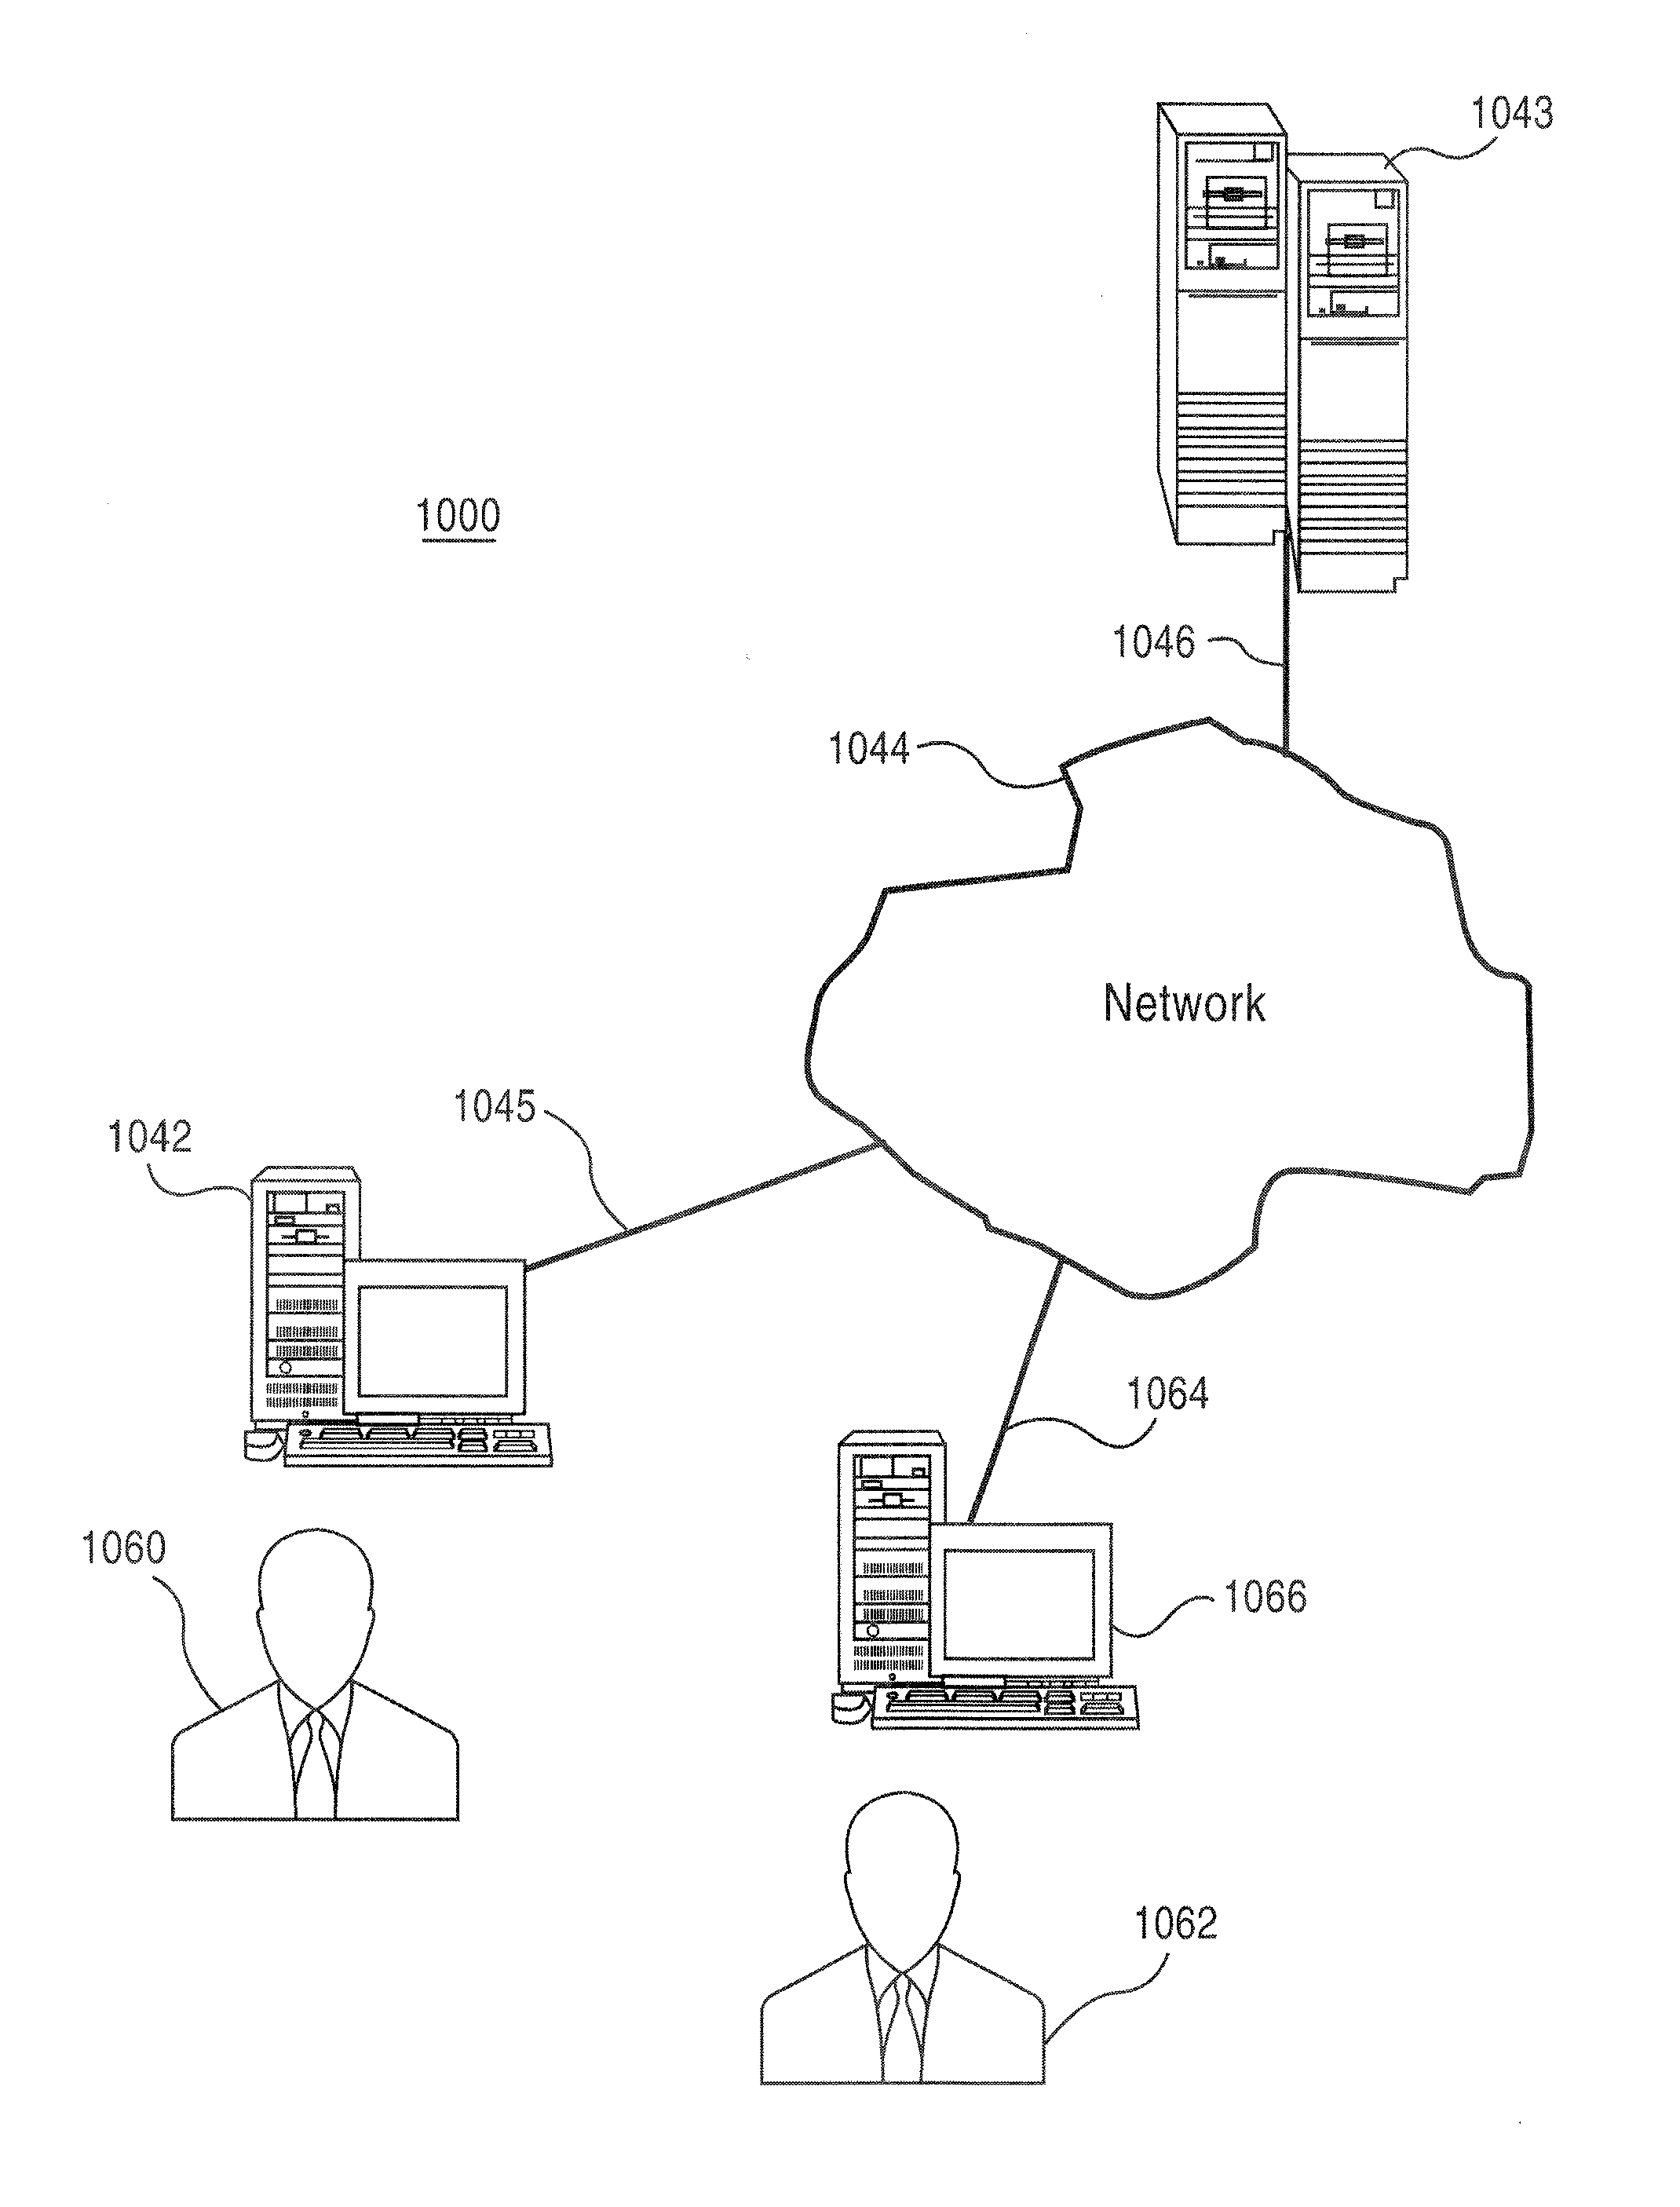 Community information exchange system and method